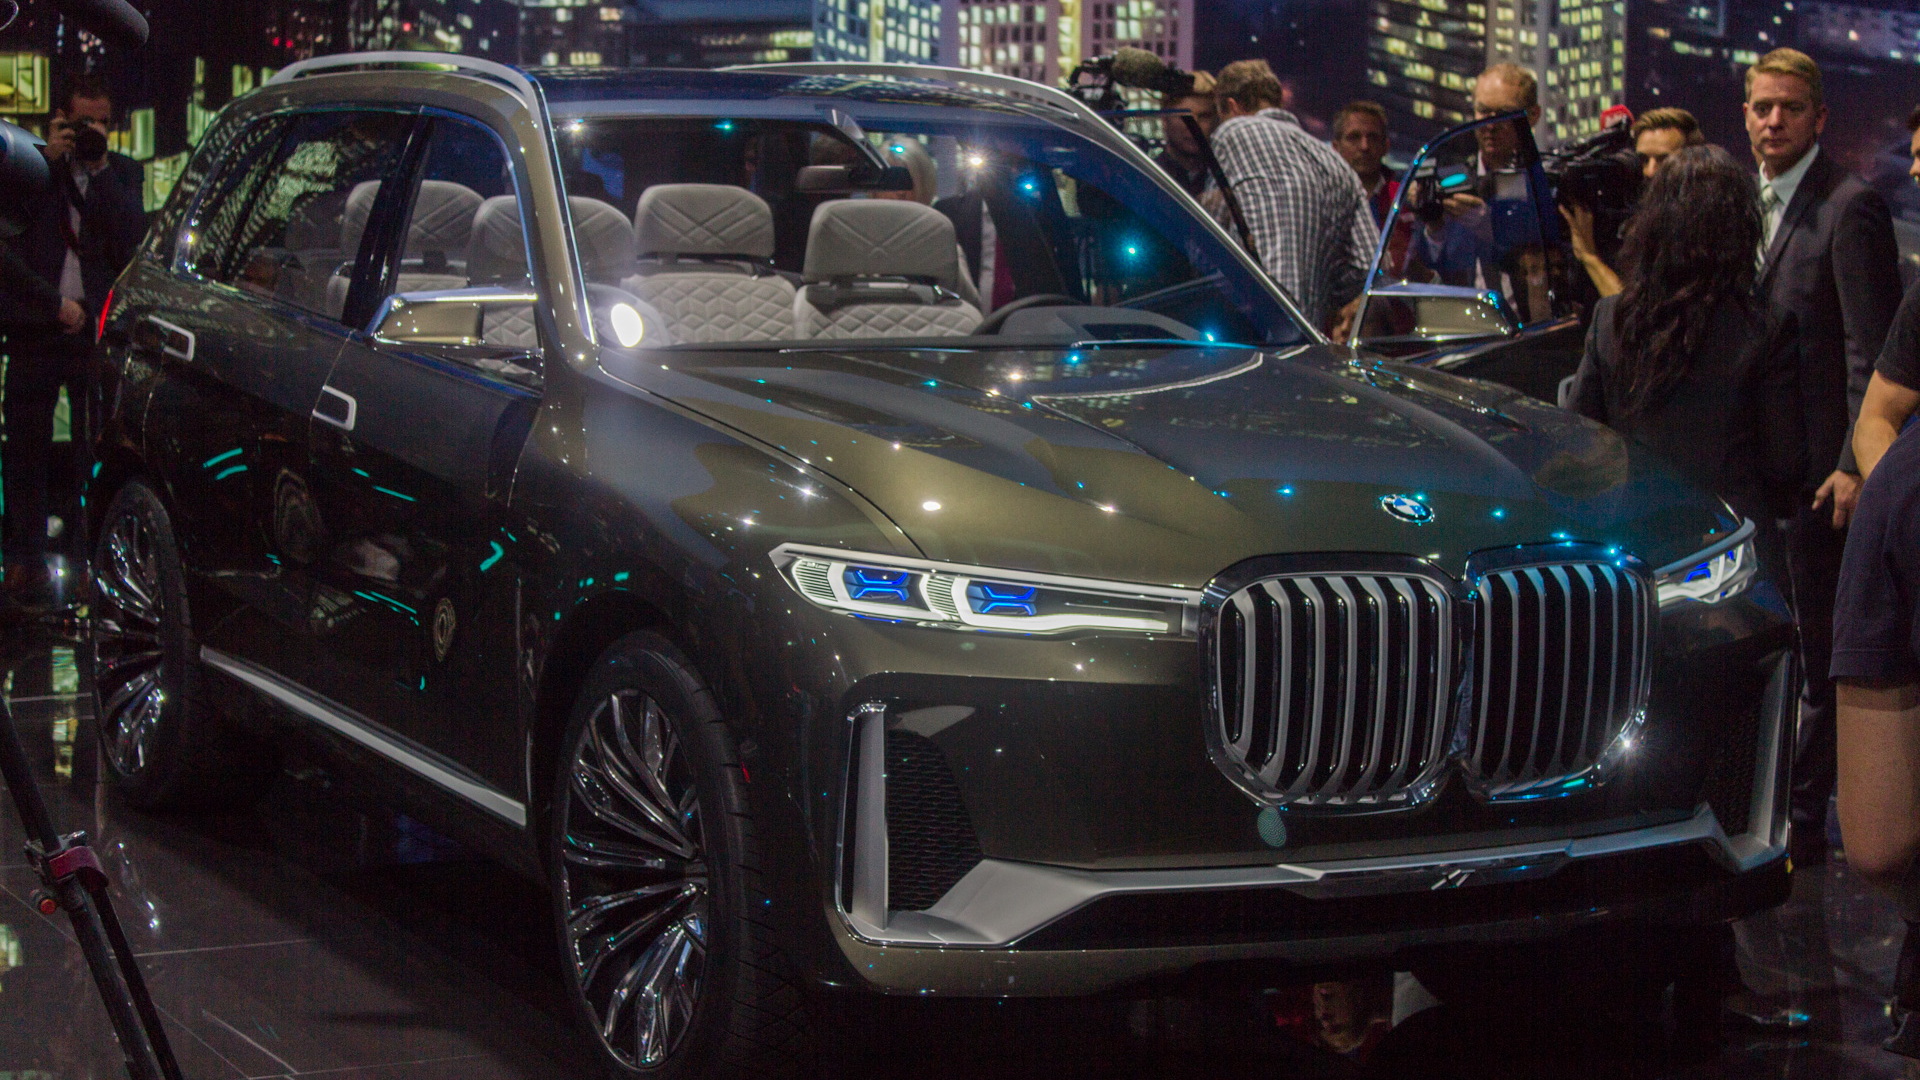 BMW X7 concept previews new full-size, 3-row SUV